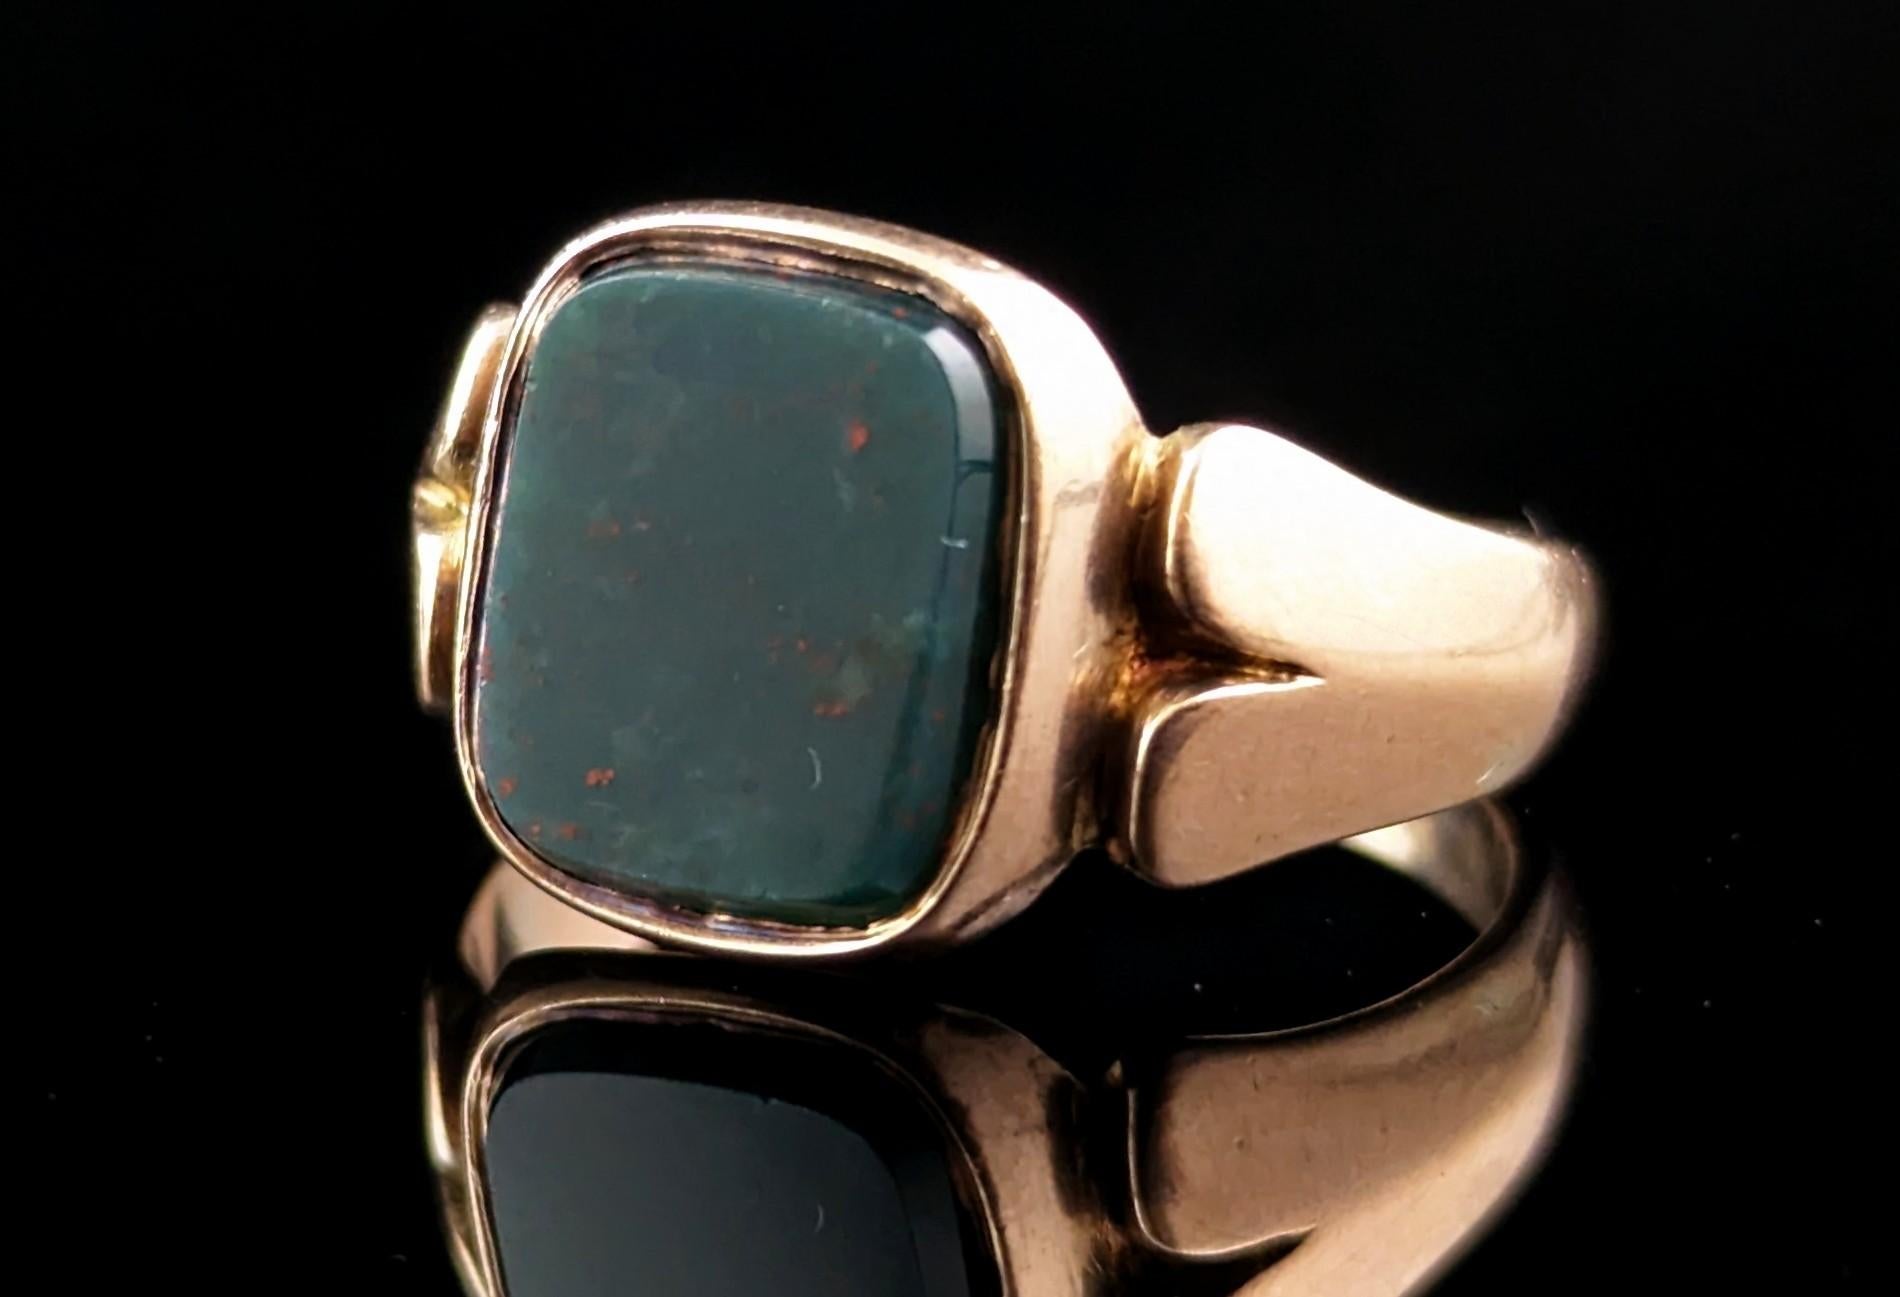 This handsome antique, Victorian era
9ct gold and Bloodstone signet ring has everything you could wish for in a signet ring!

It is a stylish and bold ring, perfect as a pinky ring, it has an rounded rectangular face set with a rich dark green